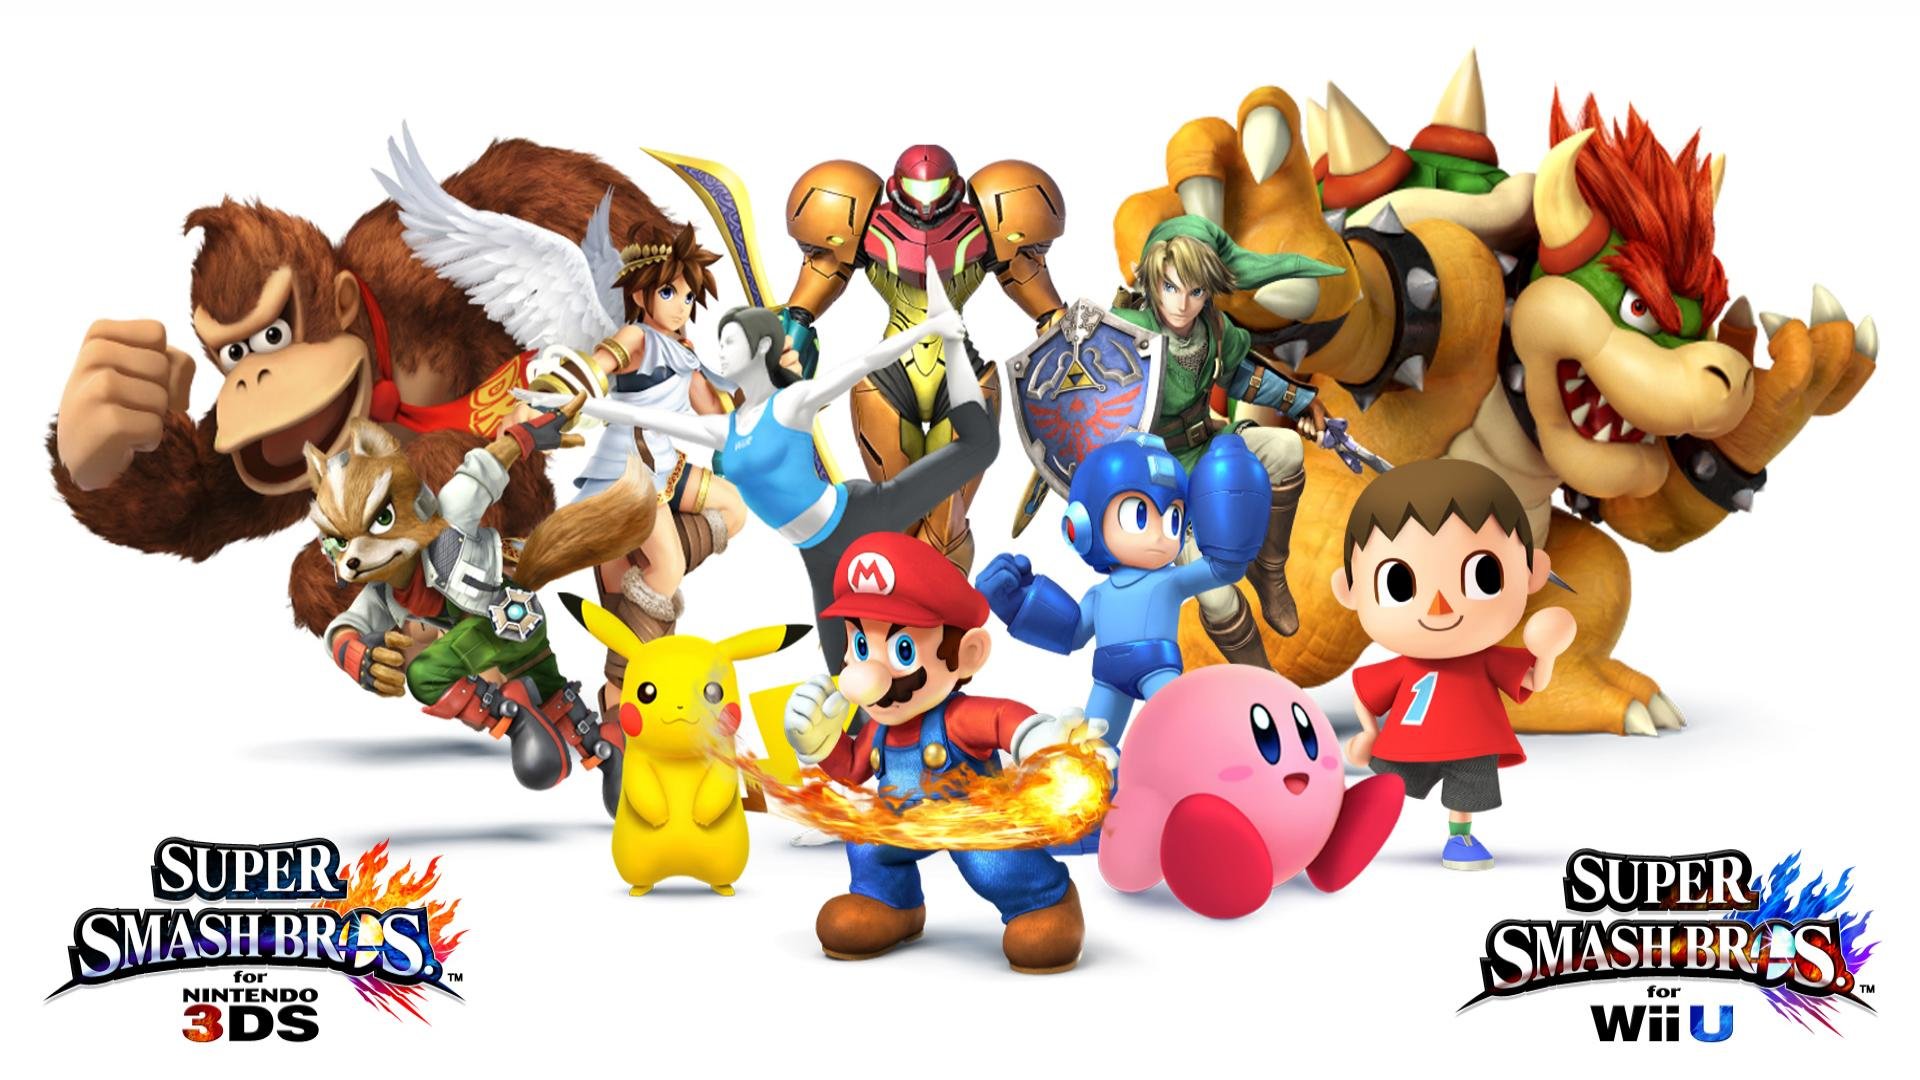 Awesome Super Smash Bros. 4 free wallpaper ID:408535 for hd 1080p computer